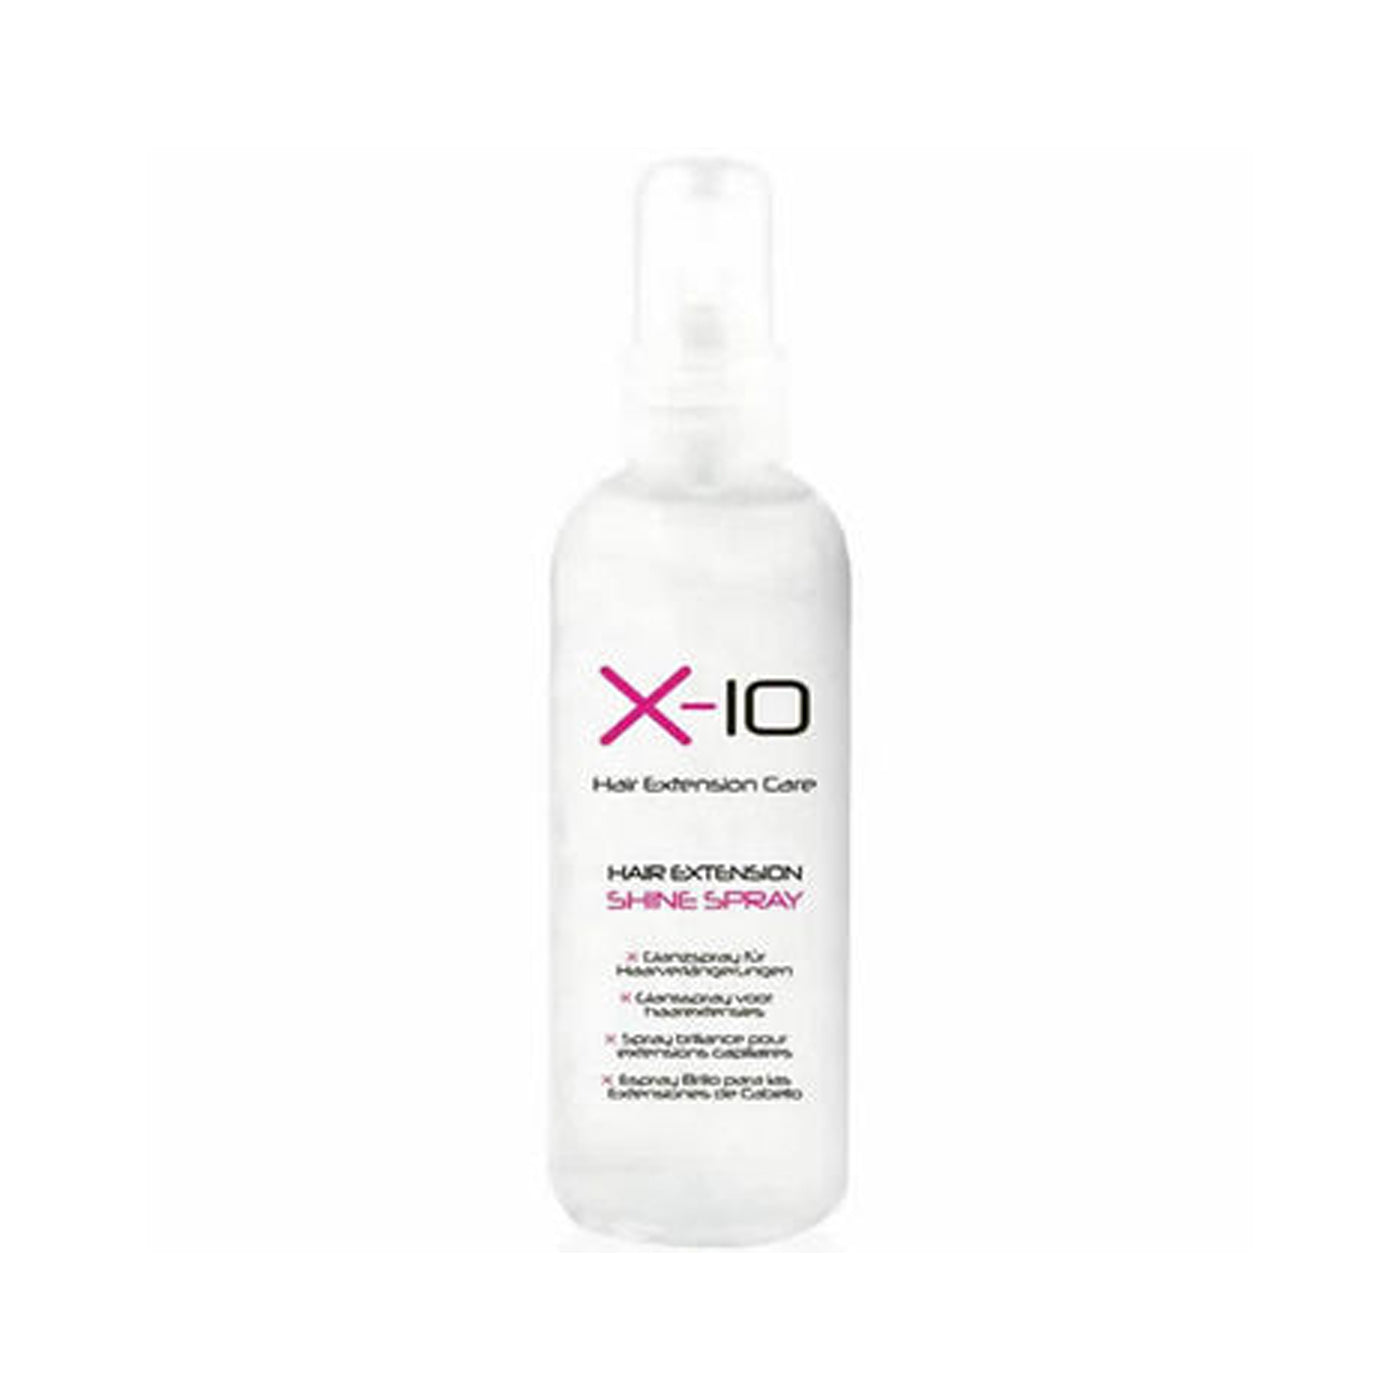 X-10 Hair Extension Care Shine Spray (125ml) - Ultimate Hair and Beauty